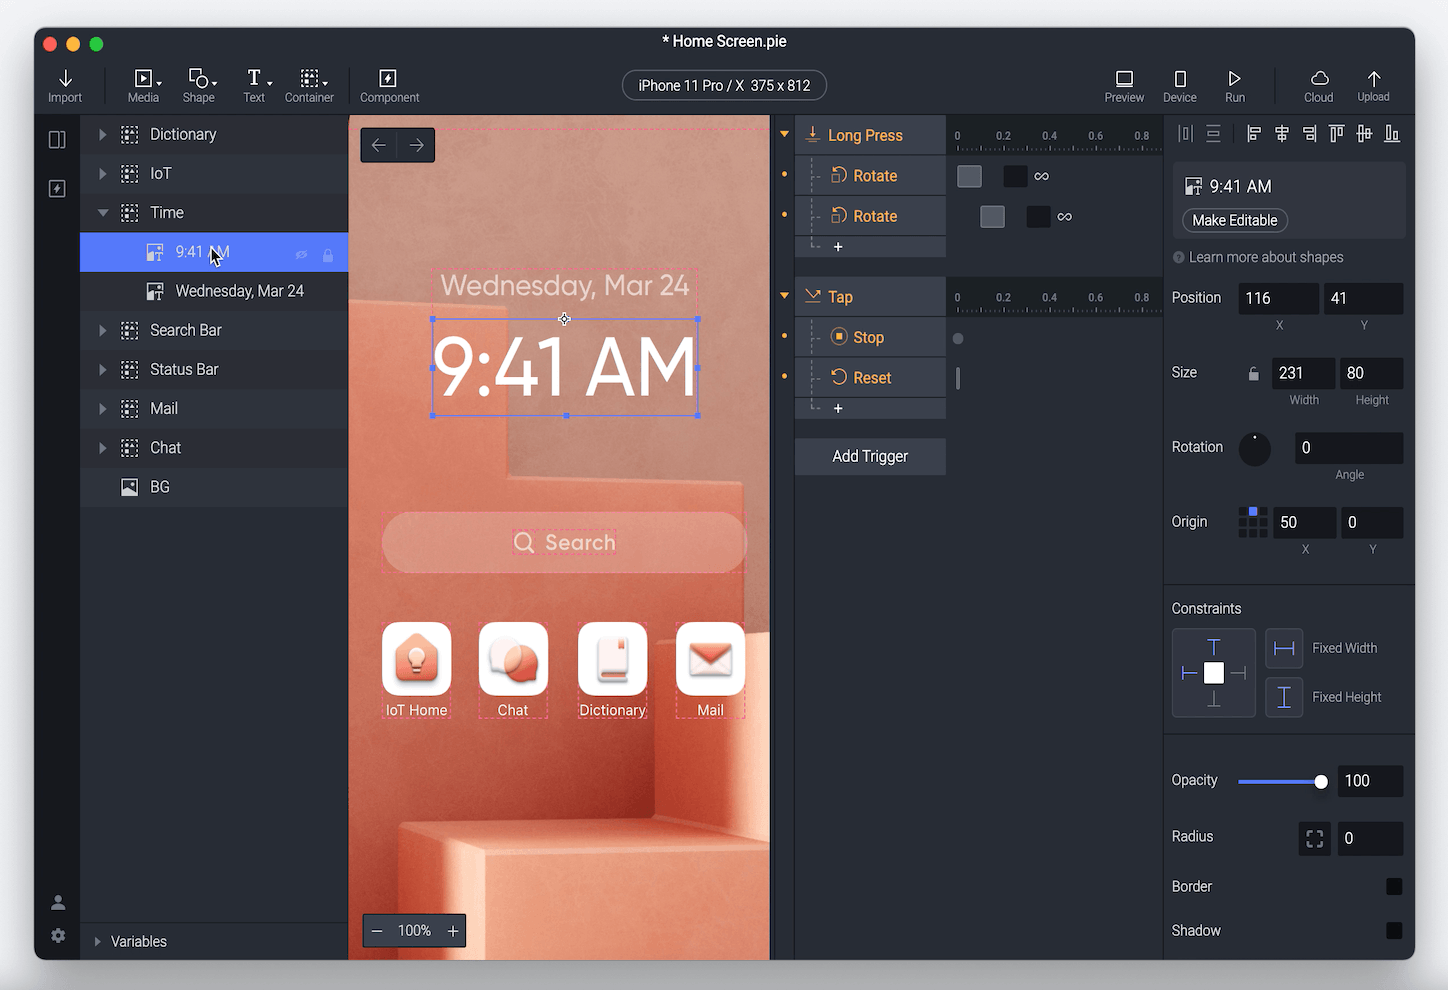 Shortcut to hide and show layers